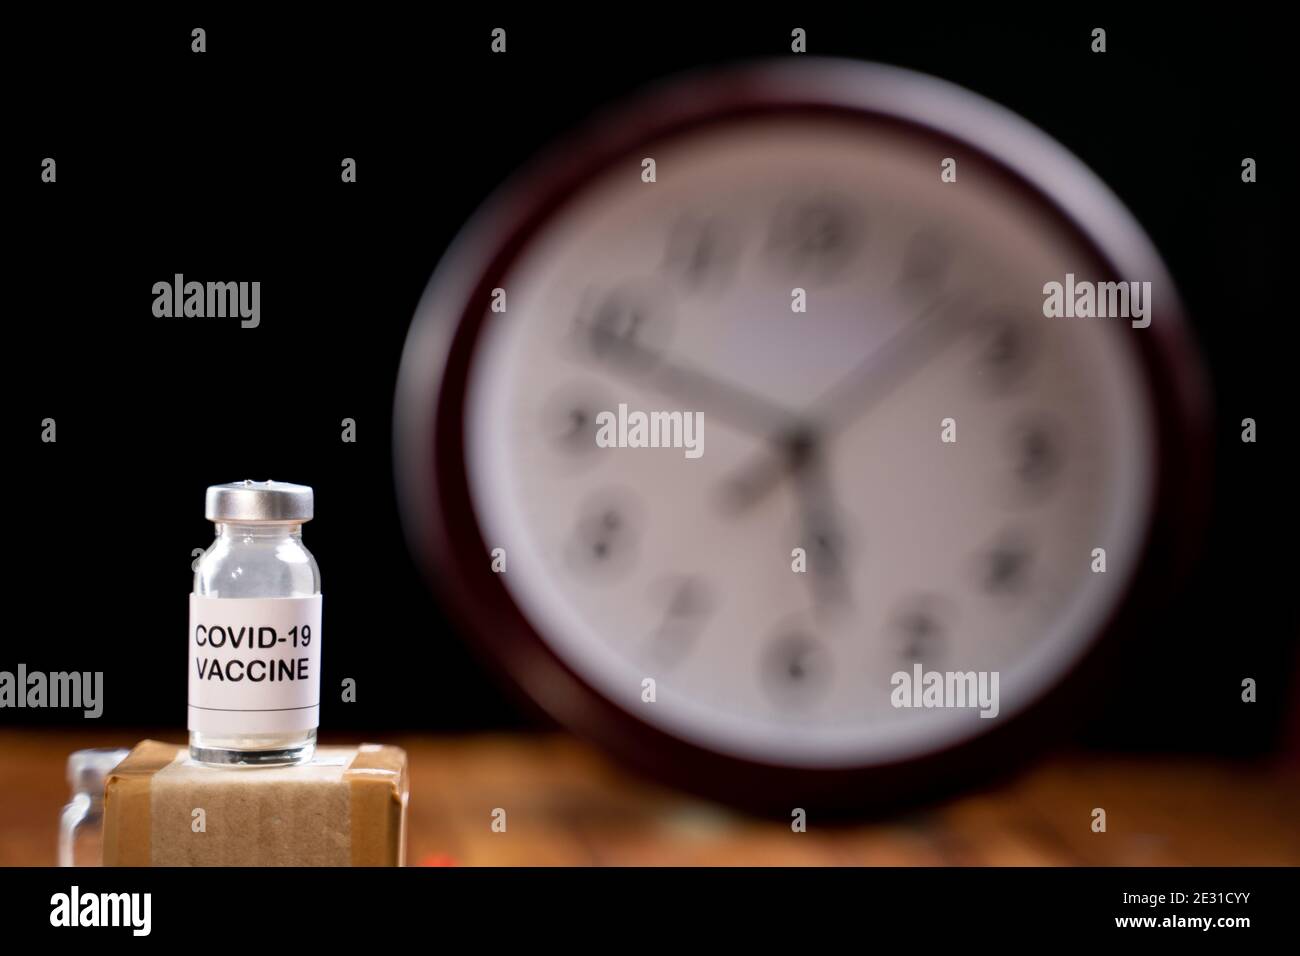 Covid-19 coronavirus vaccination bottle with clock Behind, concept of covid-19 vaccine immunity duration and second dose time frame Stock Photo